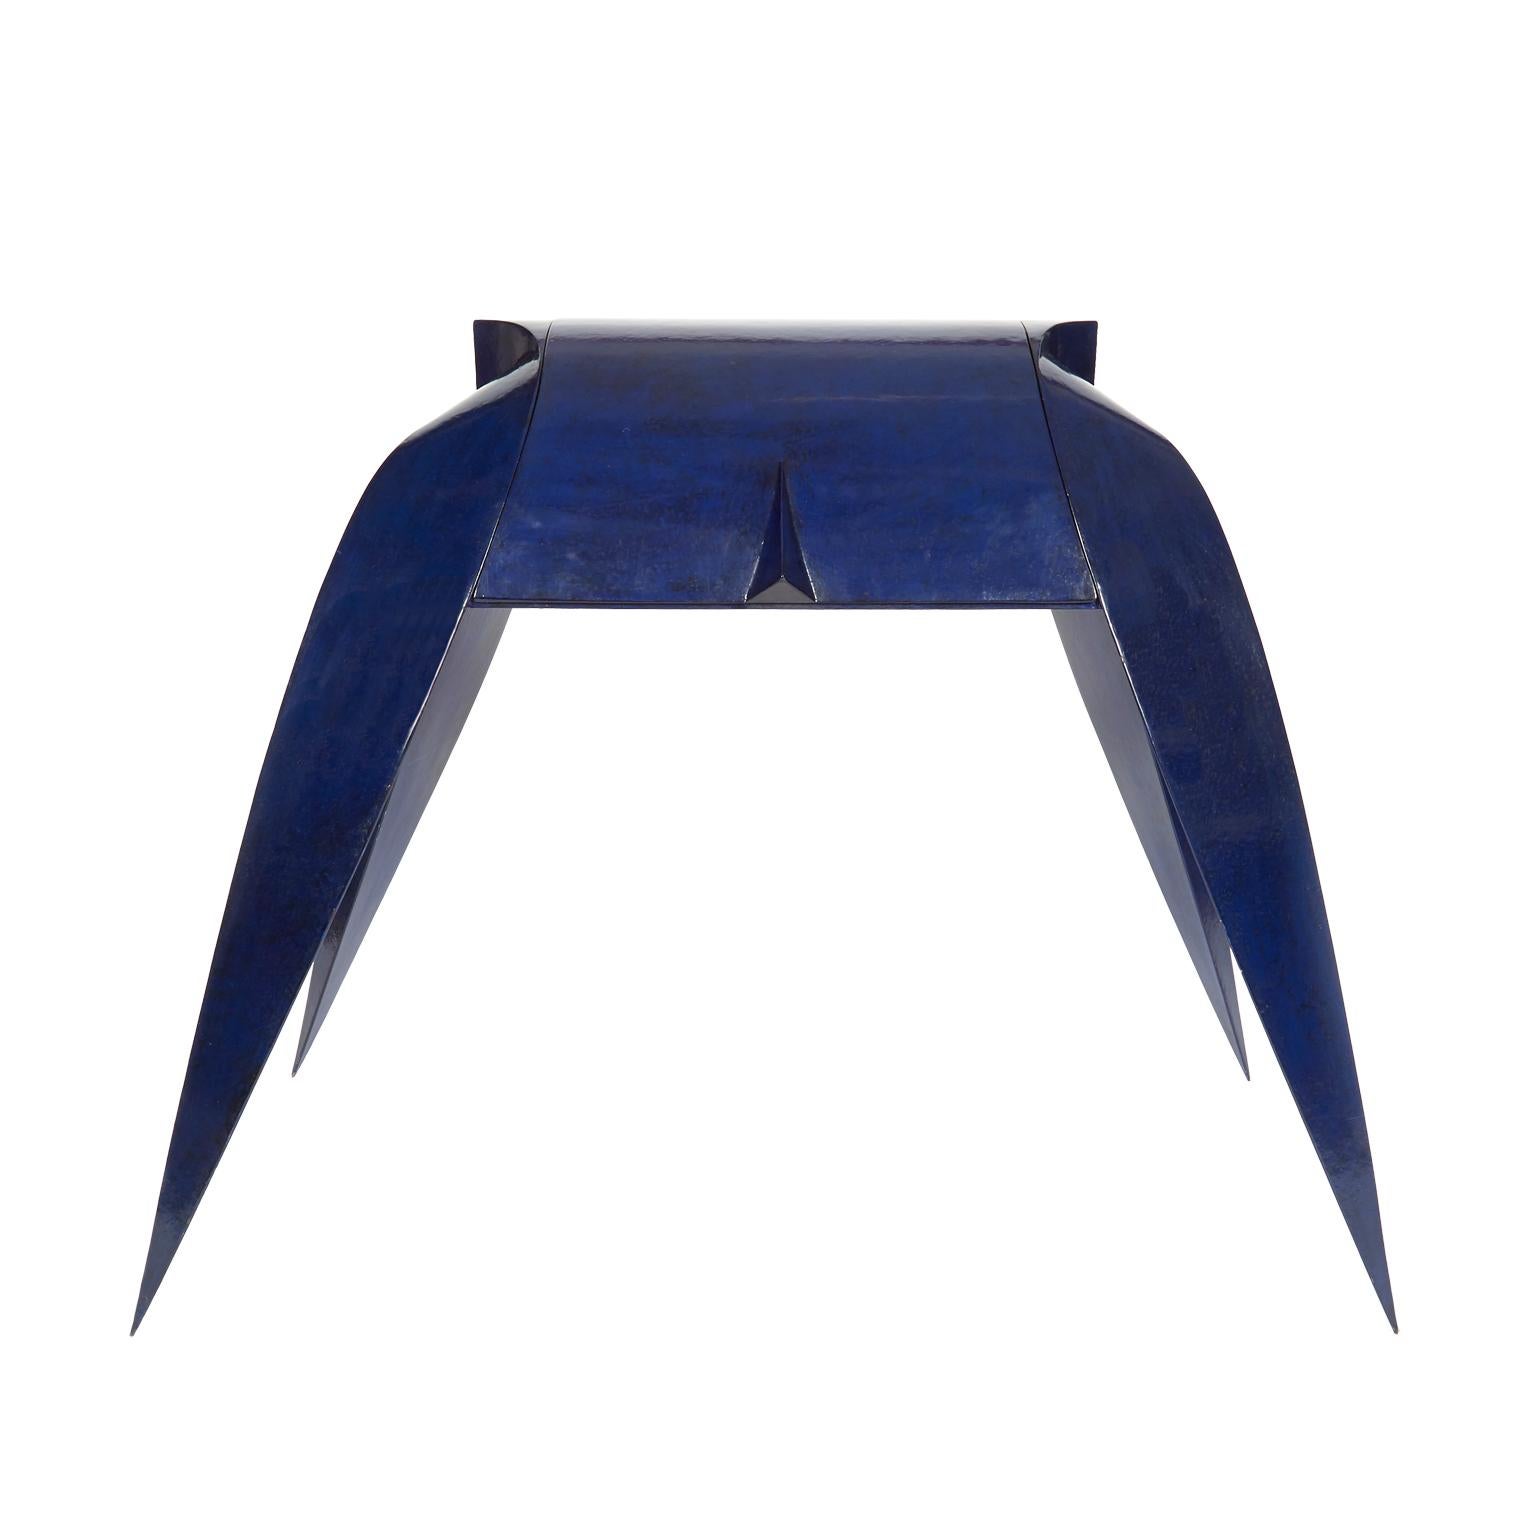 Very unusual biomorphic shaped blue metal secretaire by Yves Pogort. Lid lifts to reveal inner compartment with a bevelled edge vanity mirror, small desk surface and 2 swivel drawers. The pieces is signed, dated and numbered on the underside, “Yves